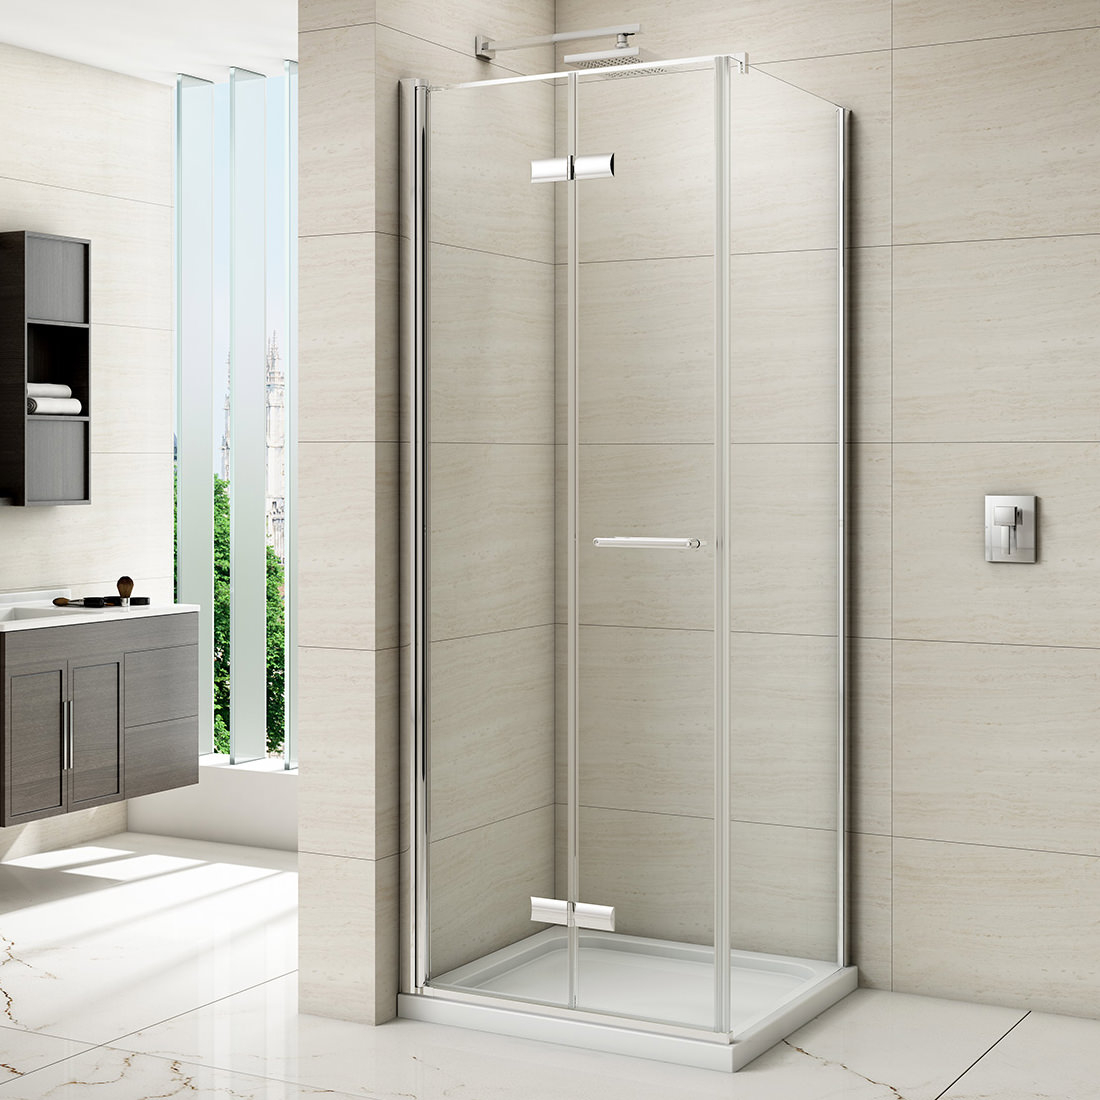 Merlyn 8 Series Frameless Hinged Bifold Shower Door 800mm M87211 pertaining to size 1100 X 1100